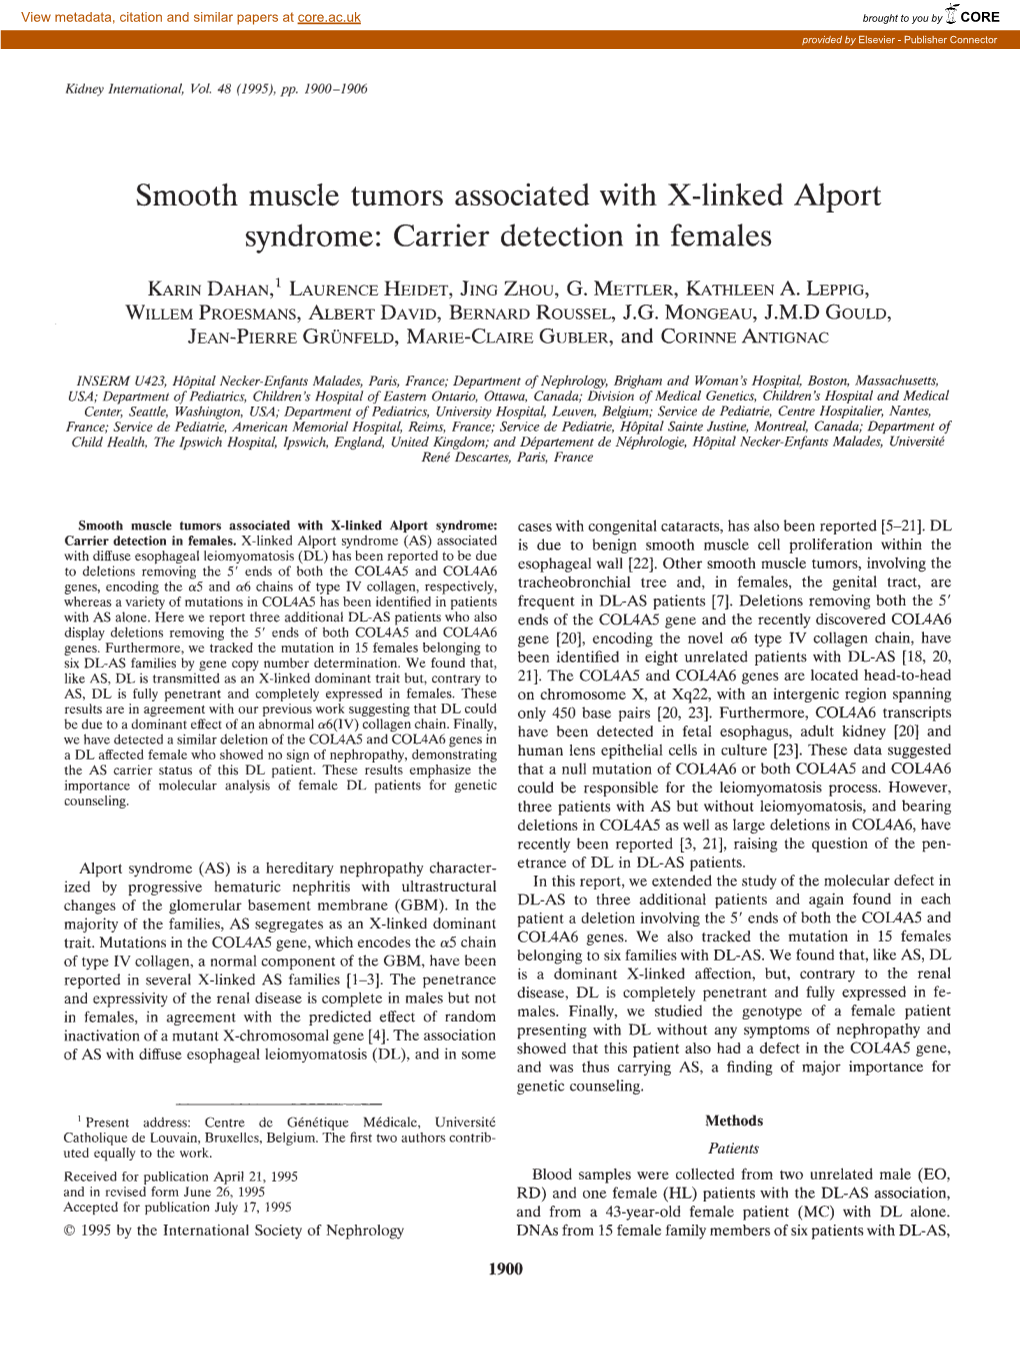 Smooth Muscle Tumors Associated with X-Linked Alport Syndrome: Carrier Detection in Females